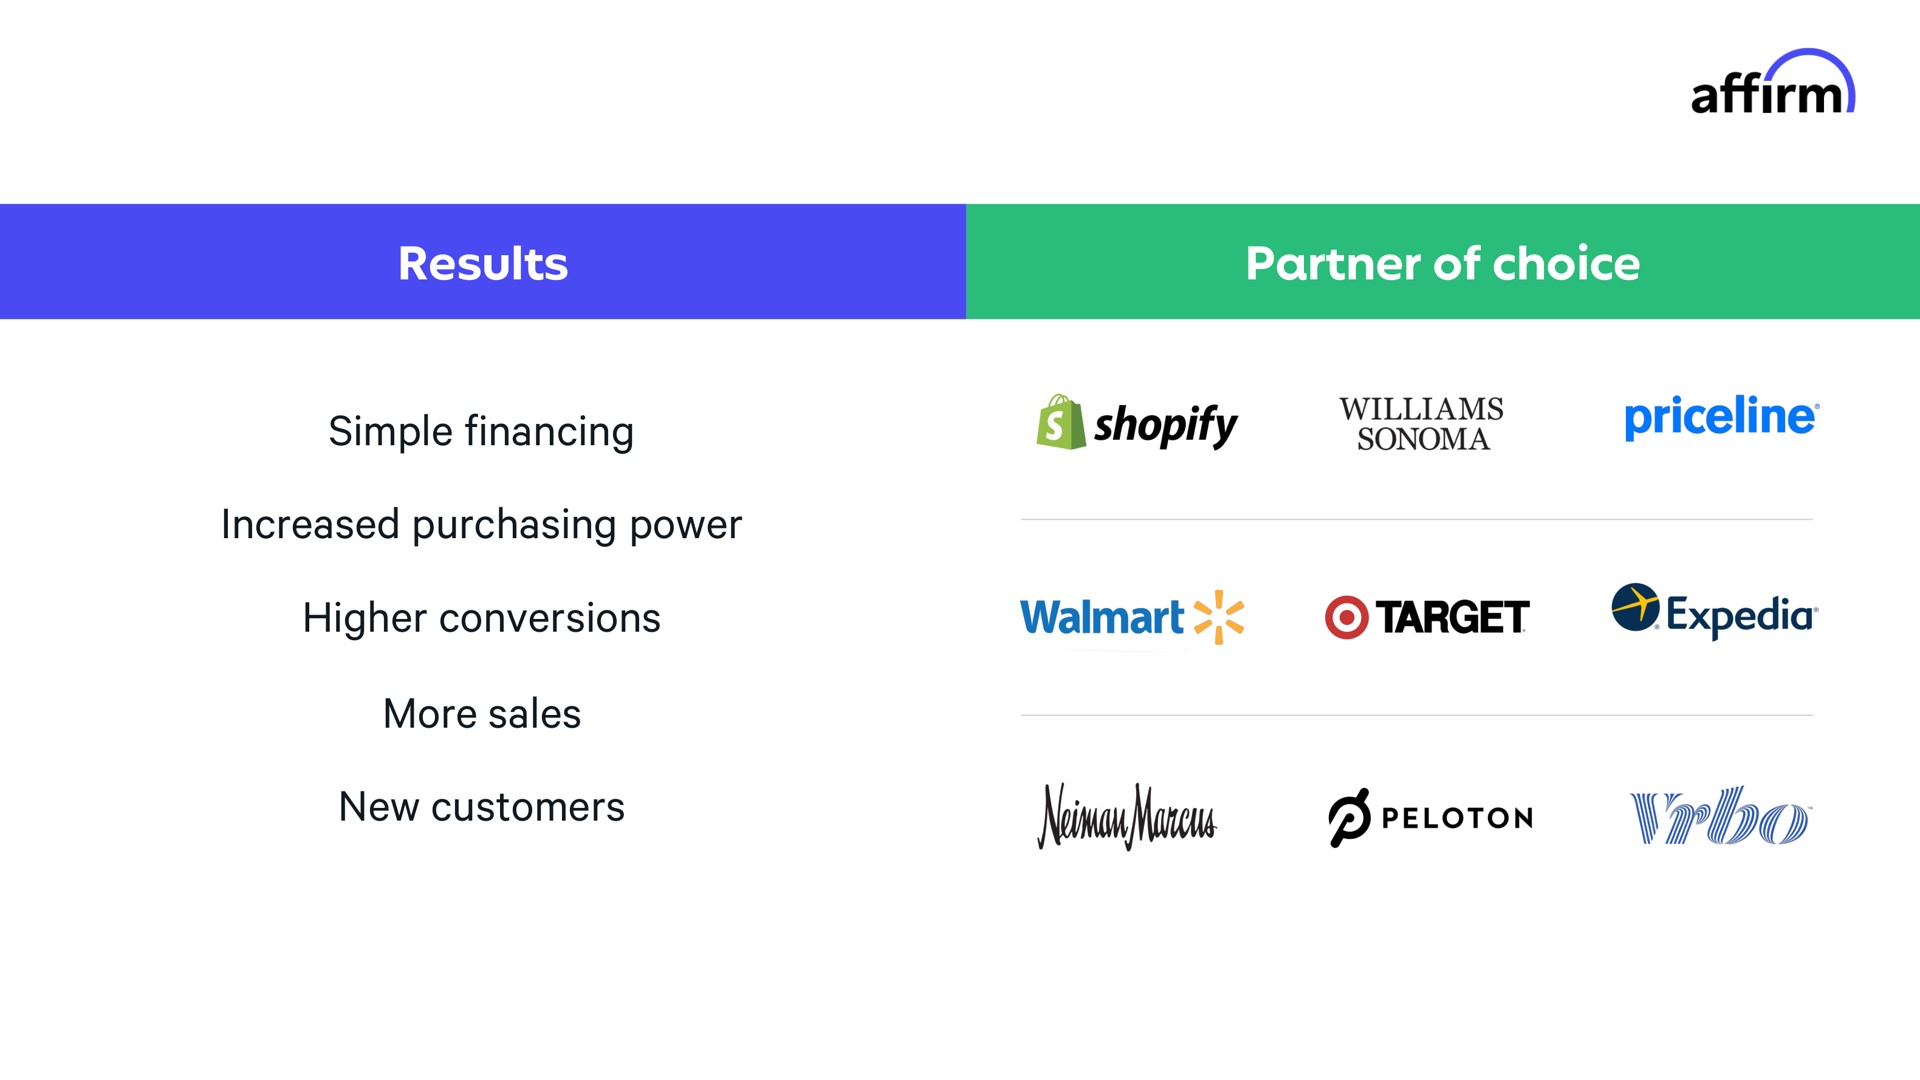 results partner of choice simple financing increased purchasing power higher conversions more sales new customers affirm mone do peloton | Affirm